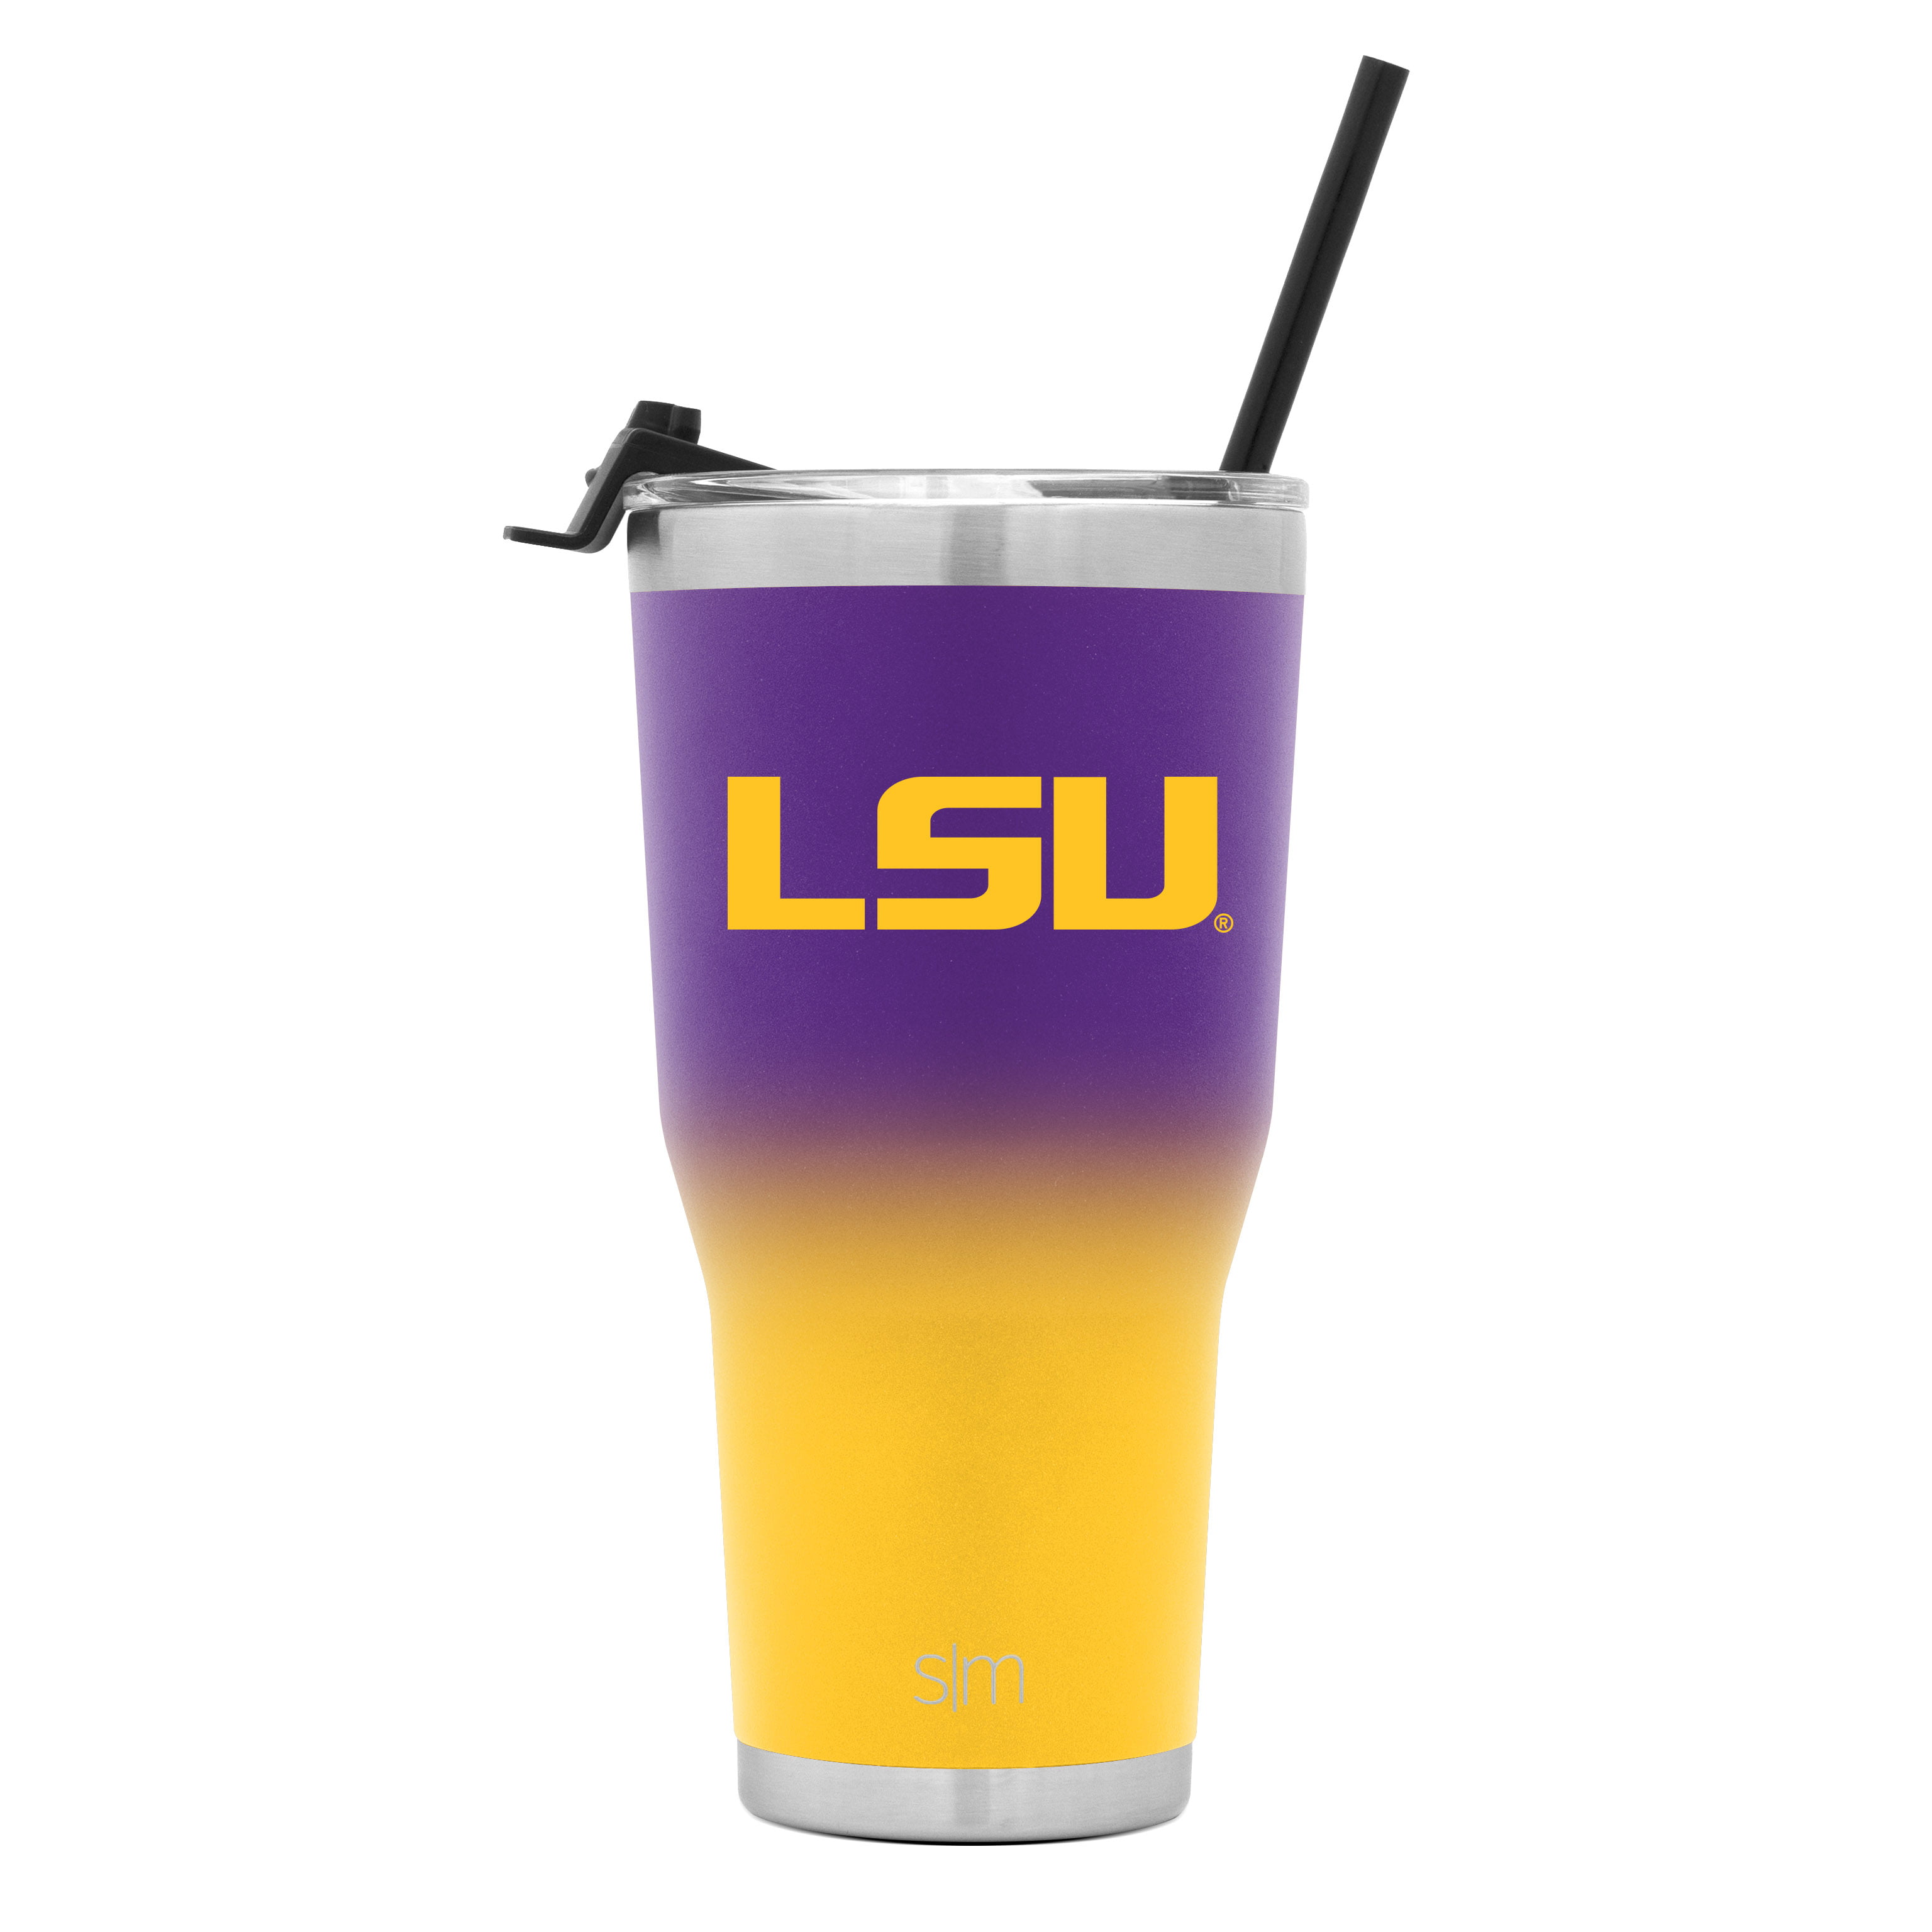 NCAA LSU Tigers Personalized 30 oz. Black Stainless Steel Tumbler